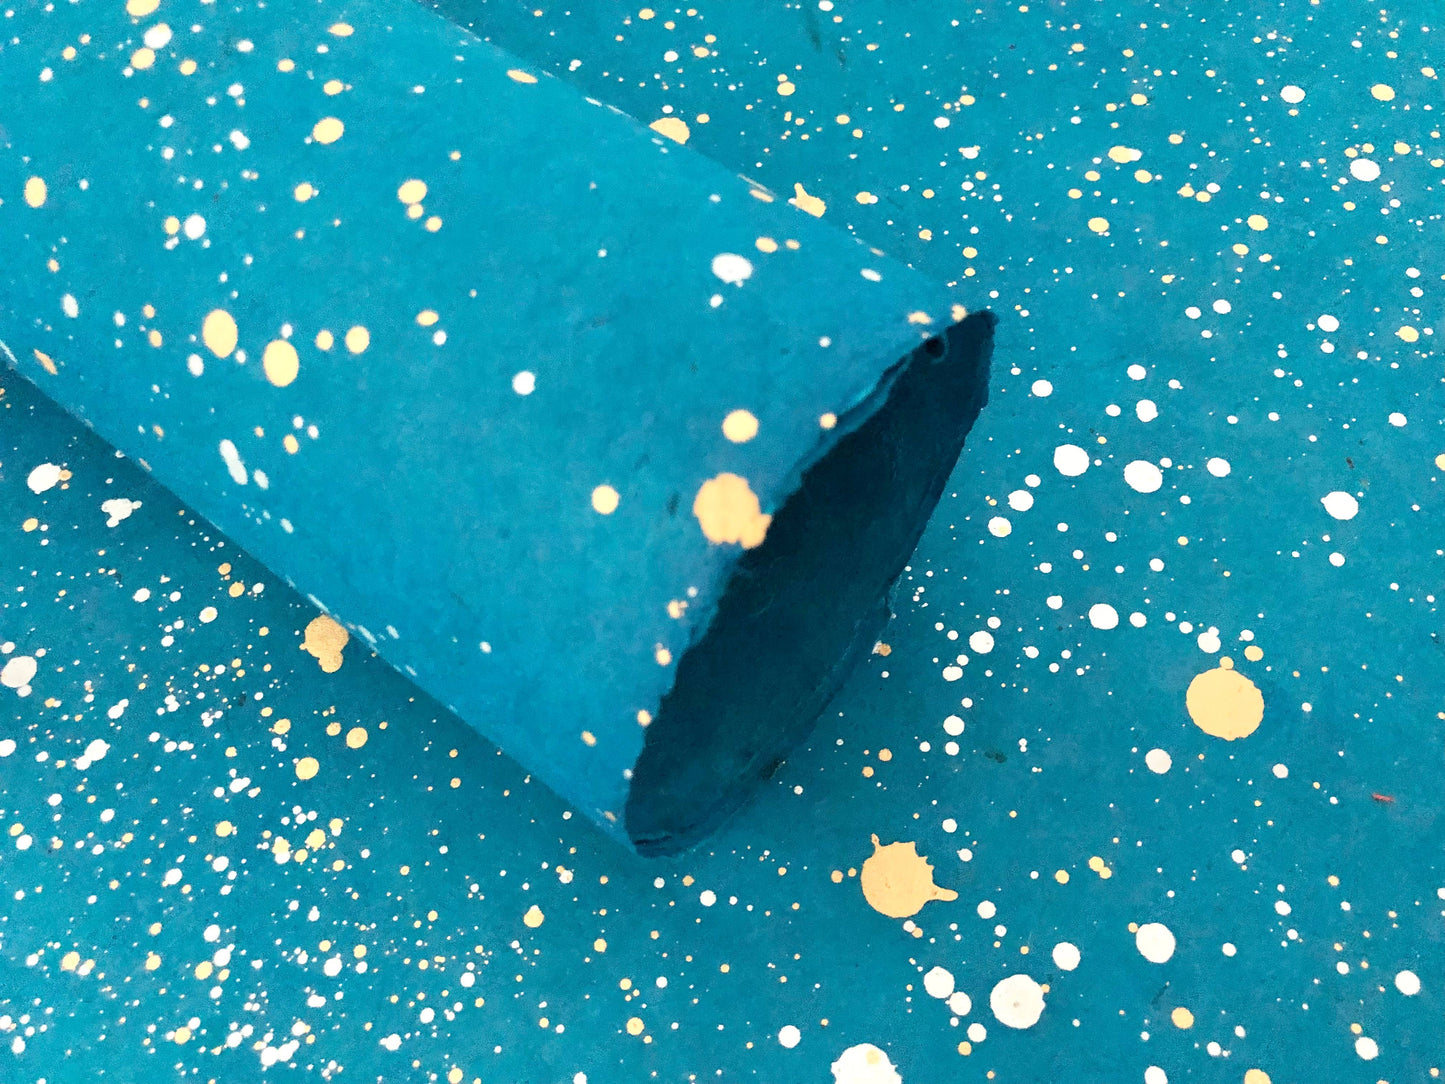 Flake on Blue - Decorative Handmade paper, Crafts paper, Wrapping Paper